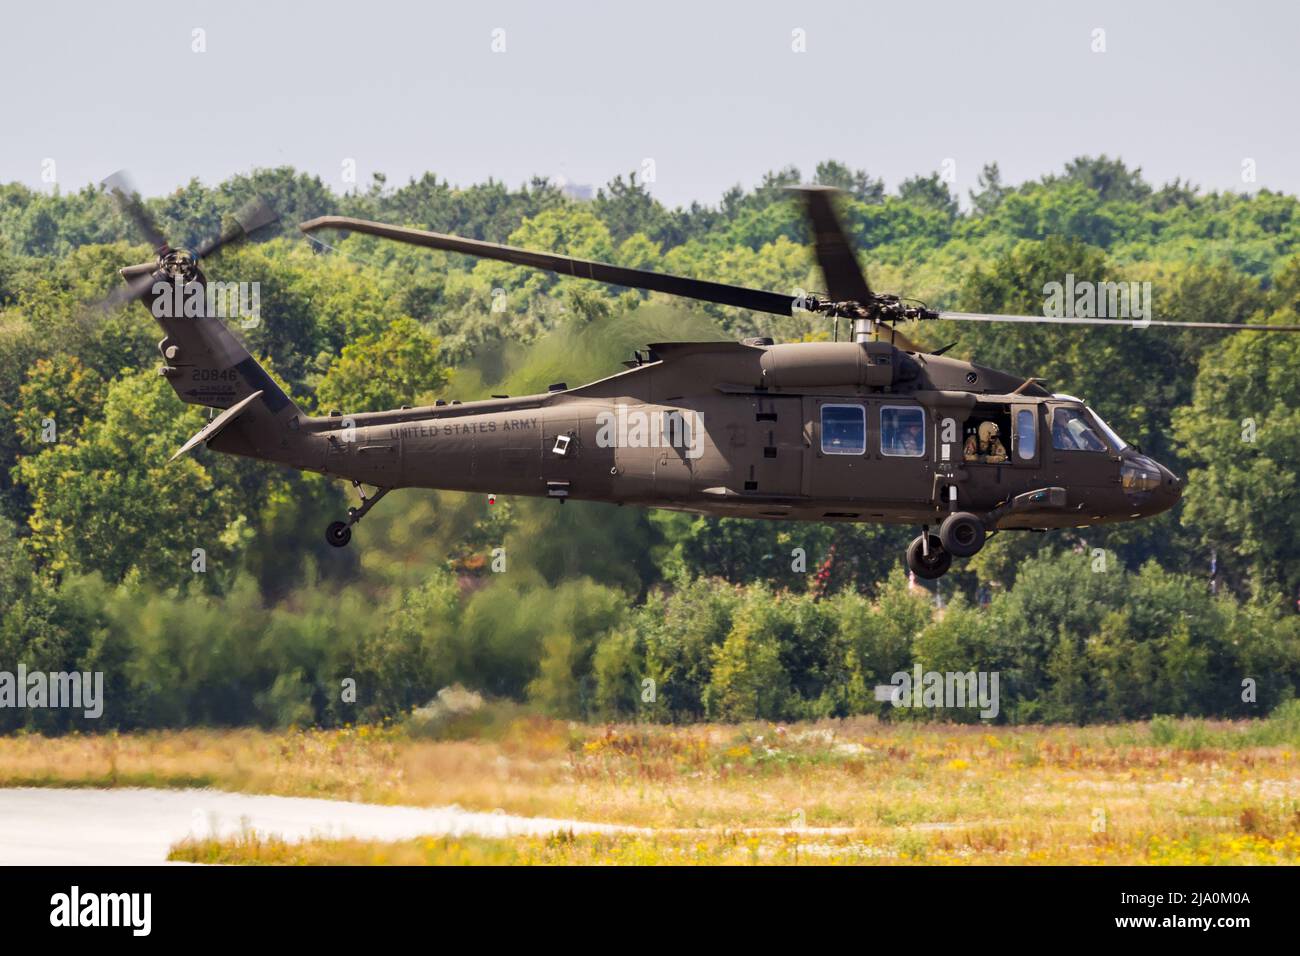 US Army Sikorsky UH-60M Black Hawk helicopters arriving at an air base in The Netherlands - June 22, 2018 Stock Photo